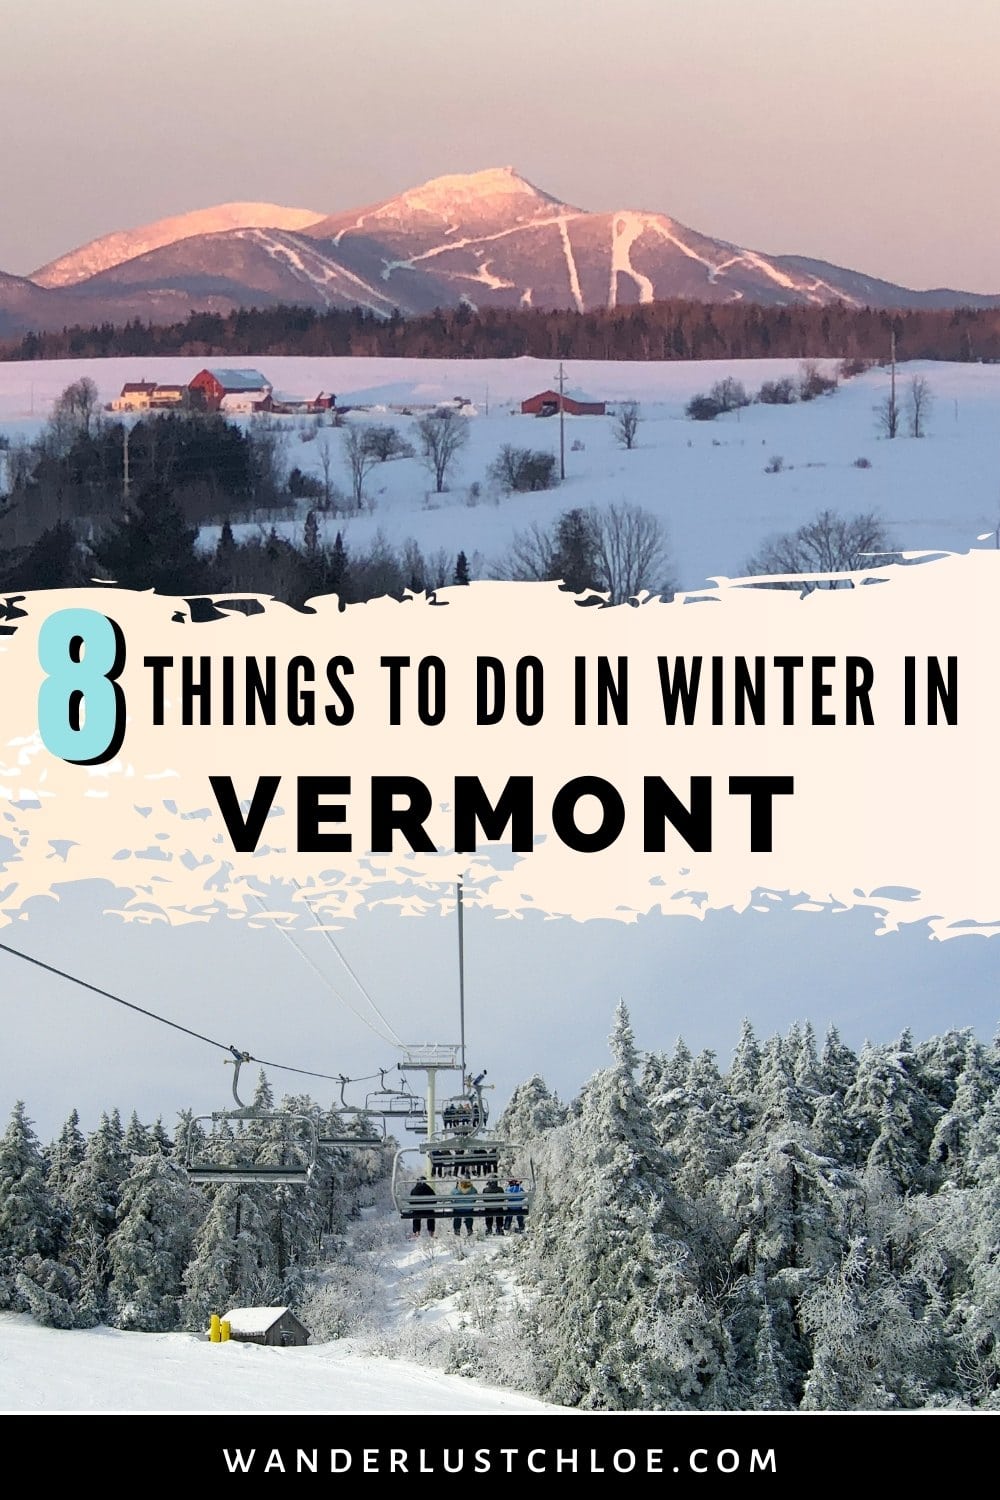 Things to do in Vermont in winter